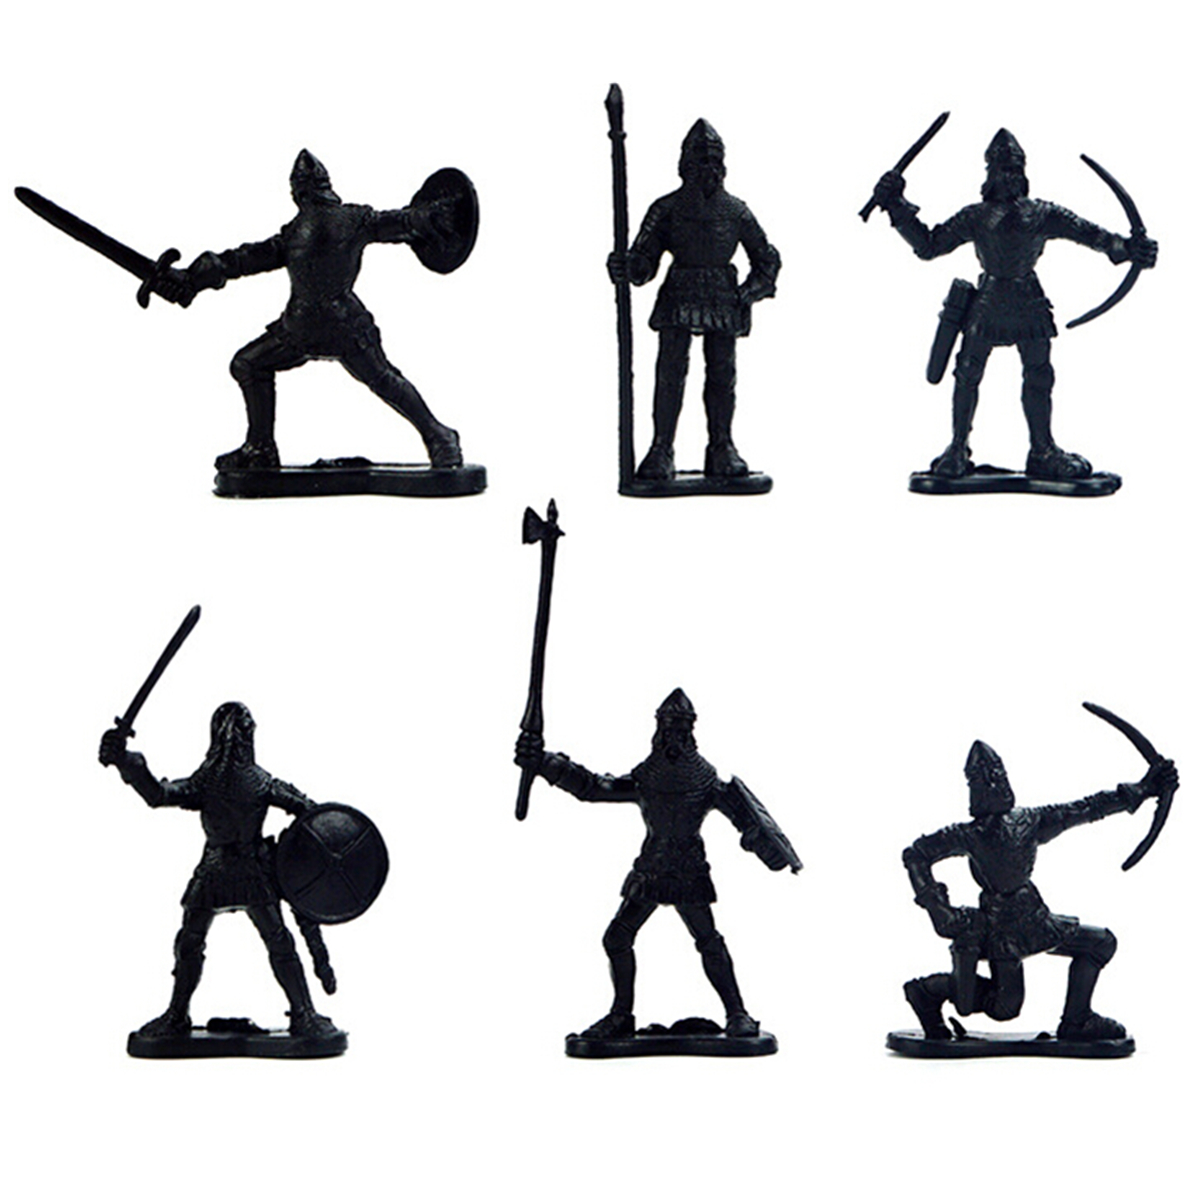 14-pcs-Knights-Medieval-Toy-Soldiers-Action-Figure-Role-Play-Playset-1438440-2